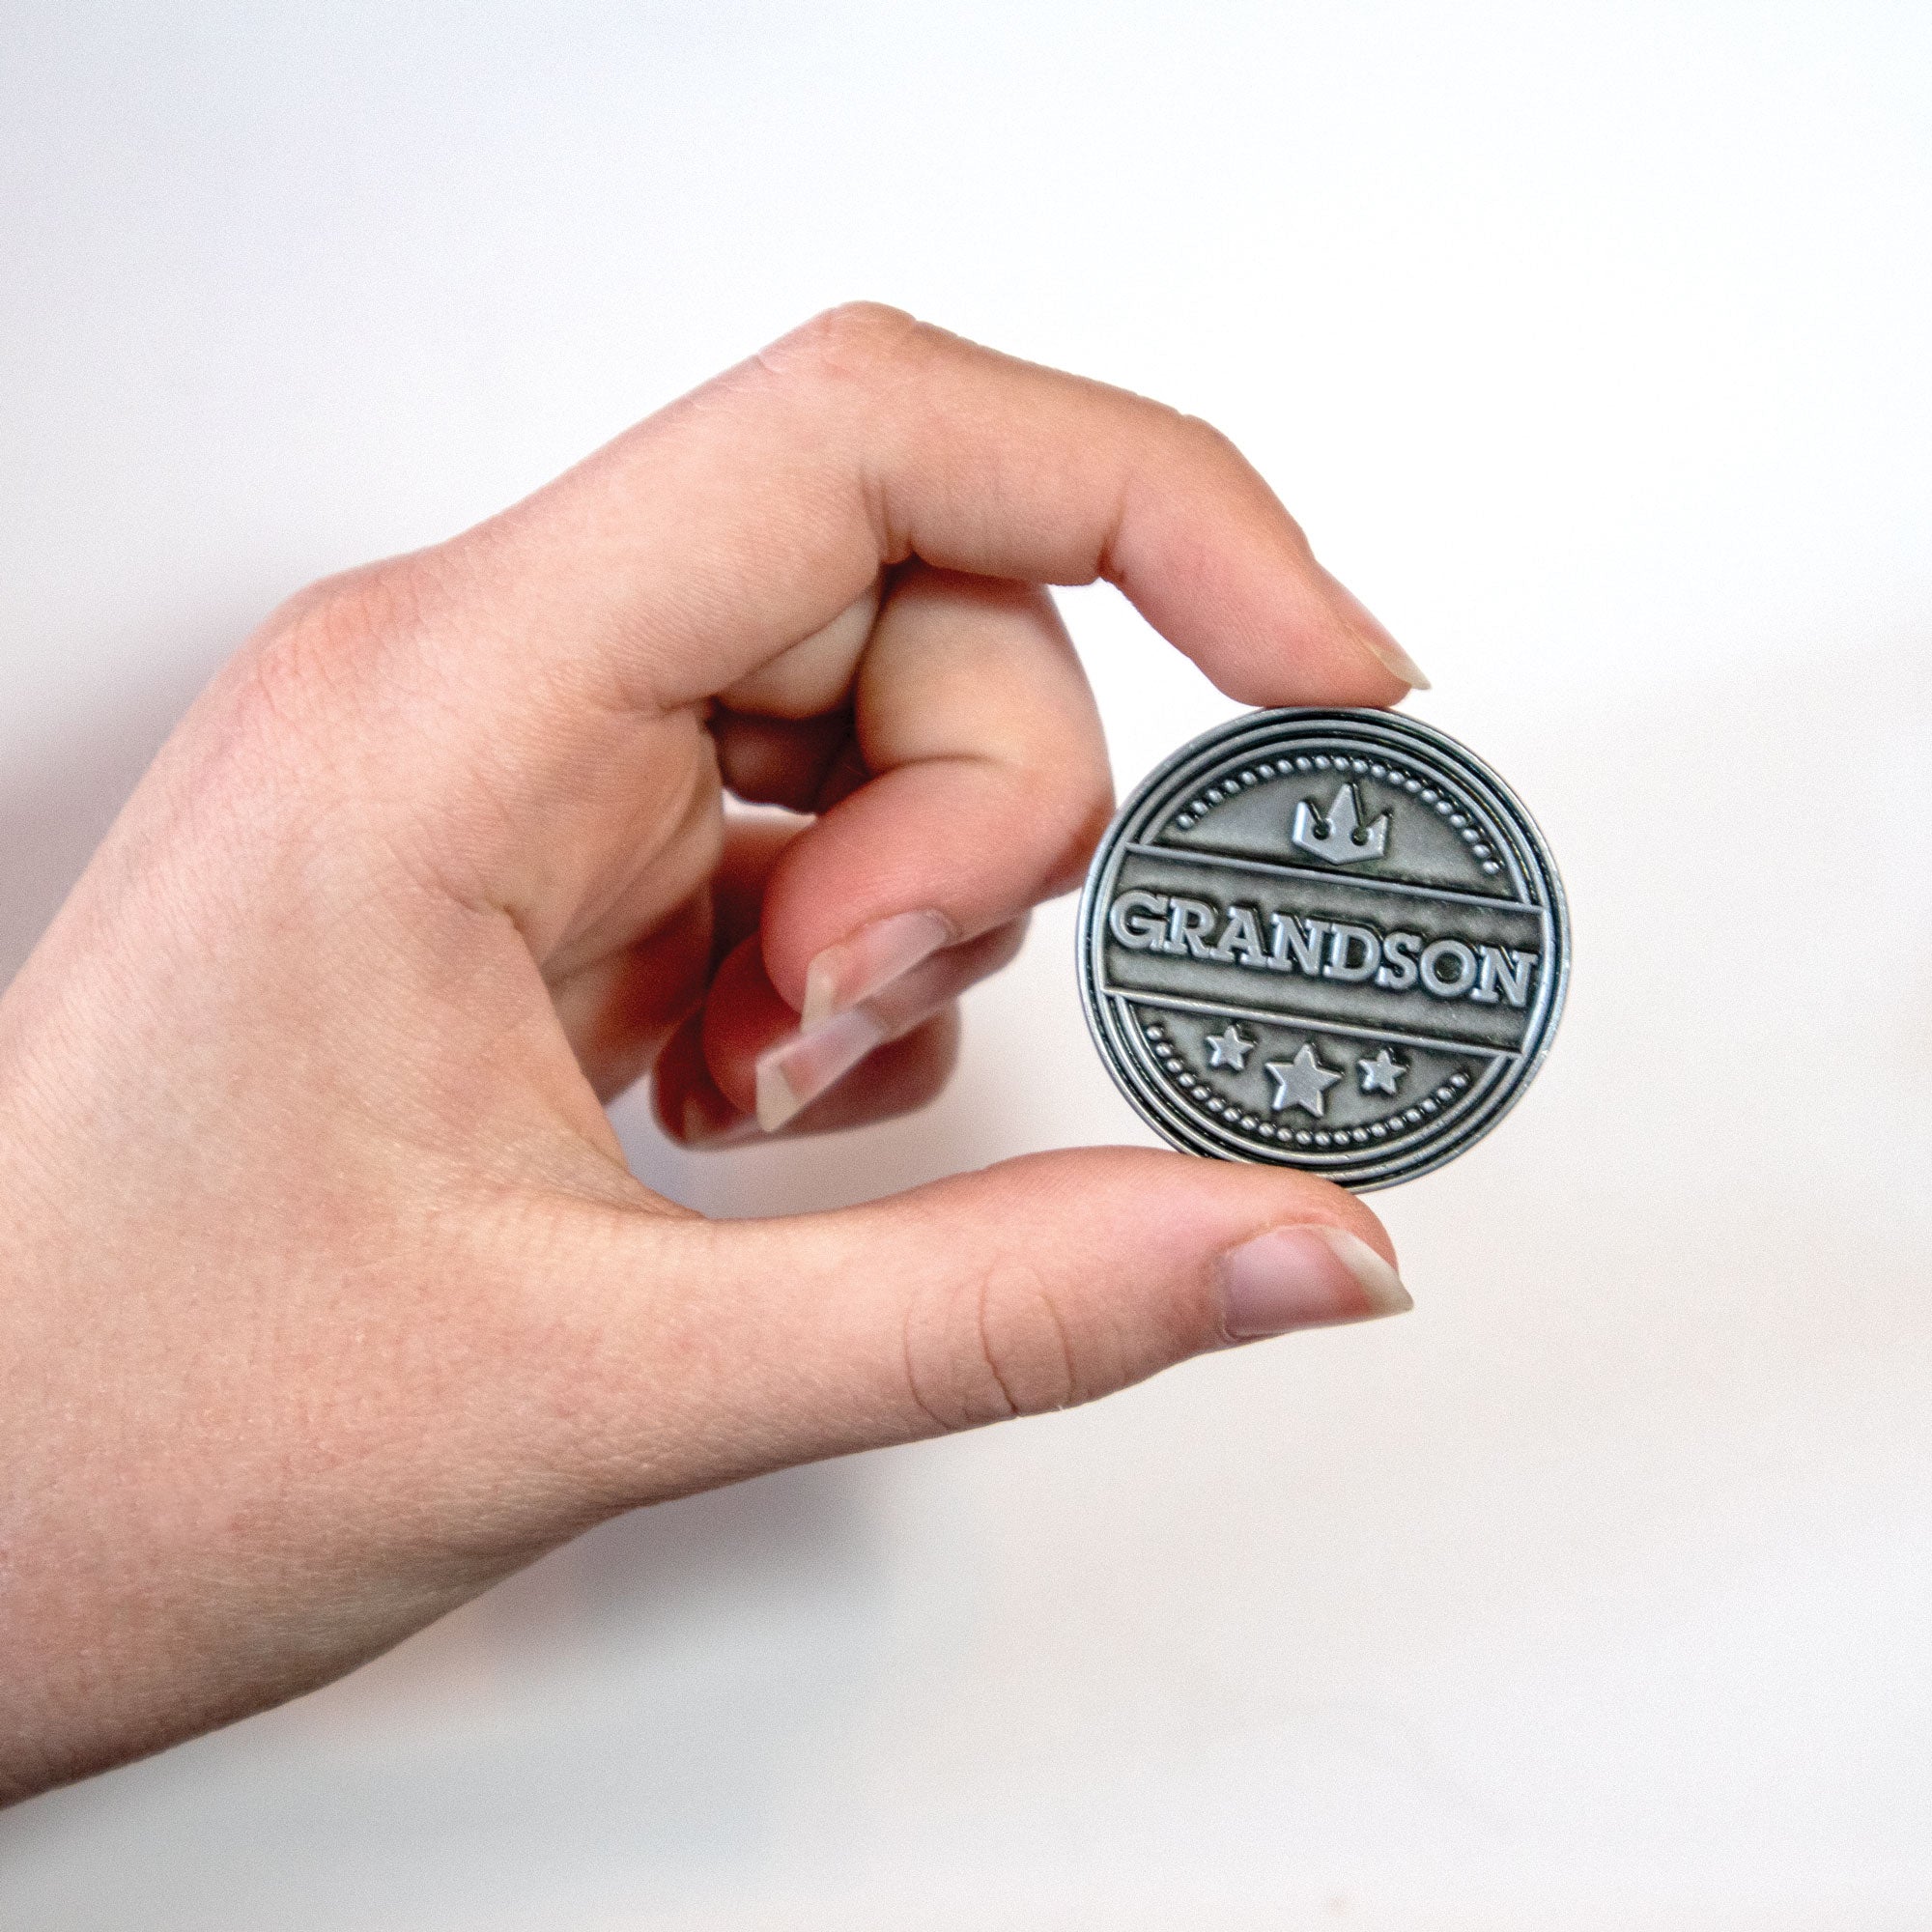 Grandsons Gift, Family Love Expression Coin